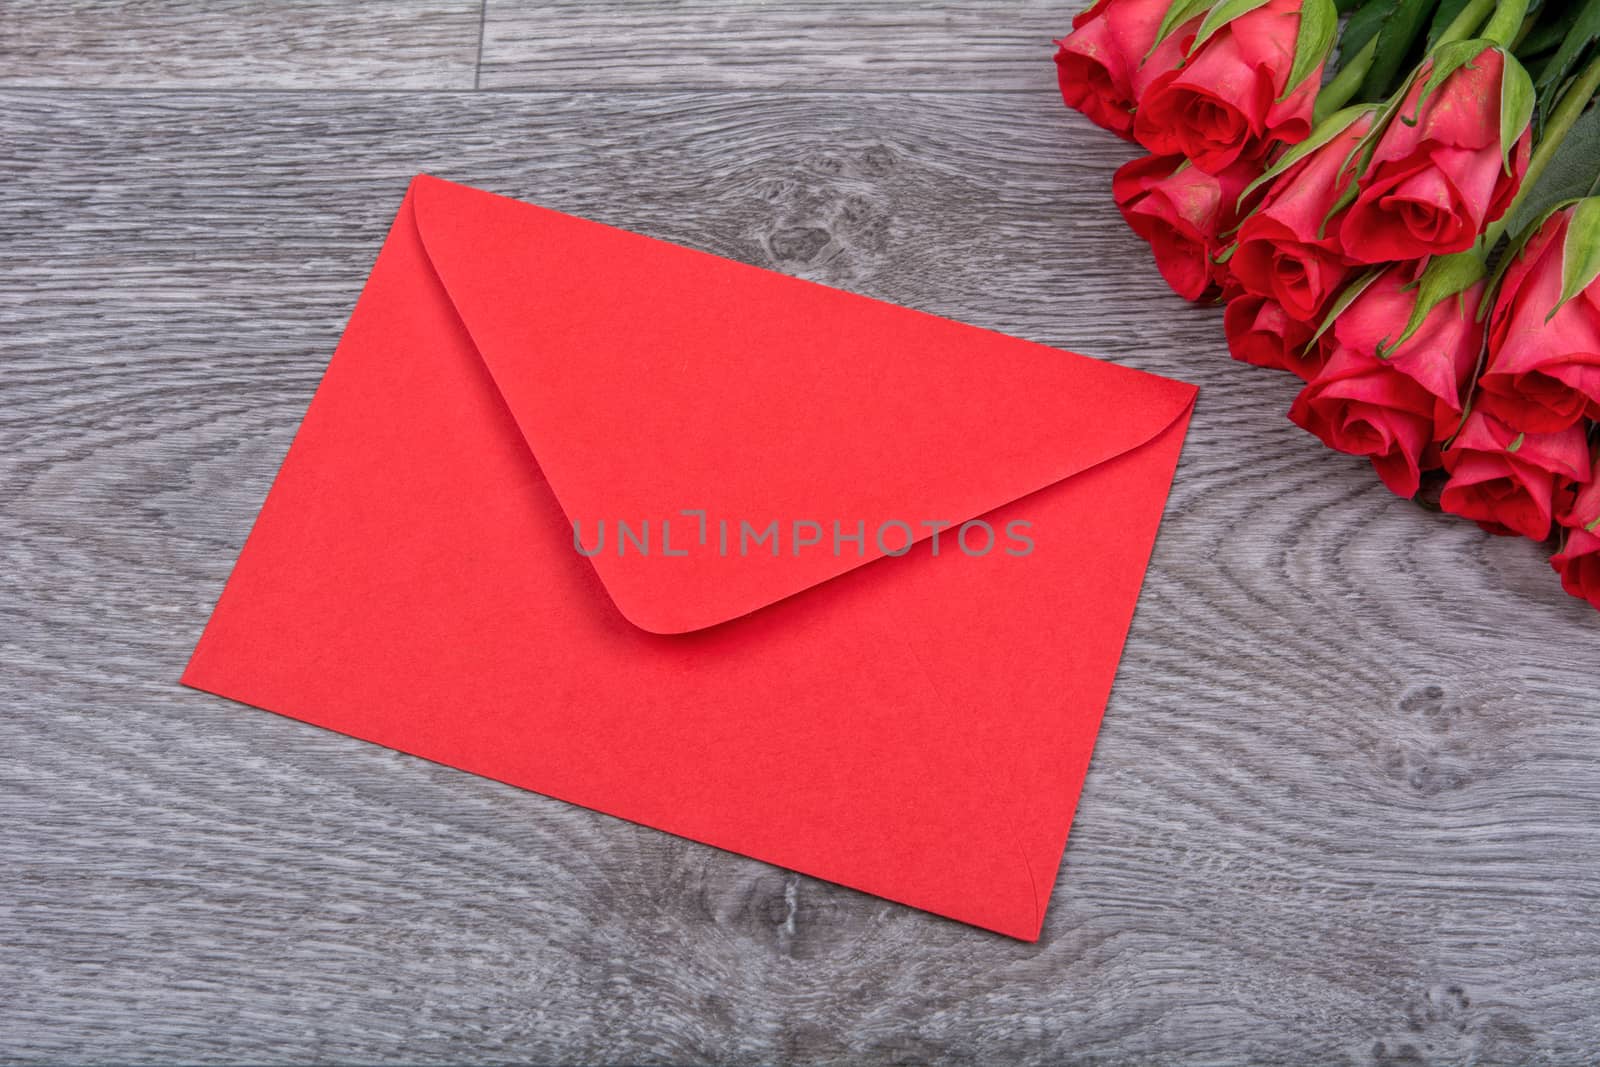 Red envelope and red roses on a wooden background